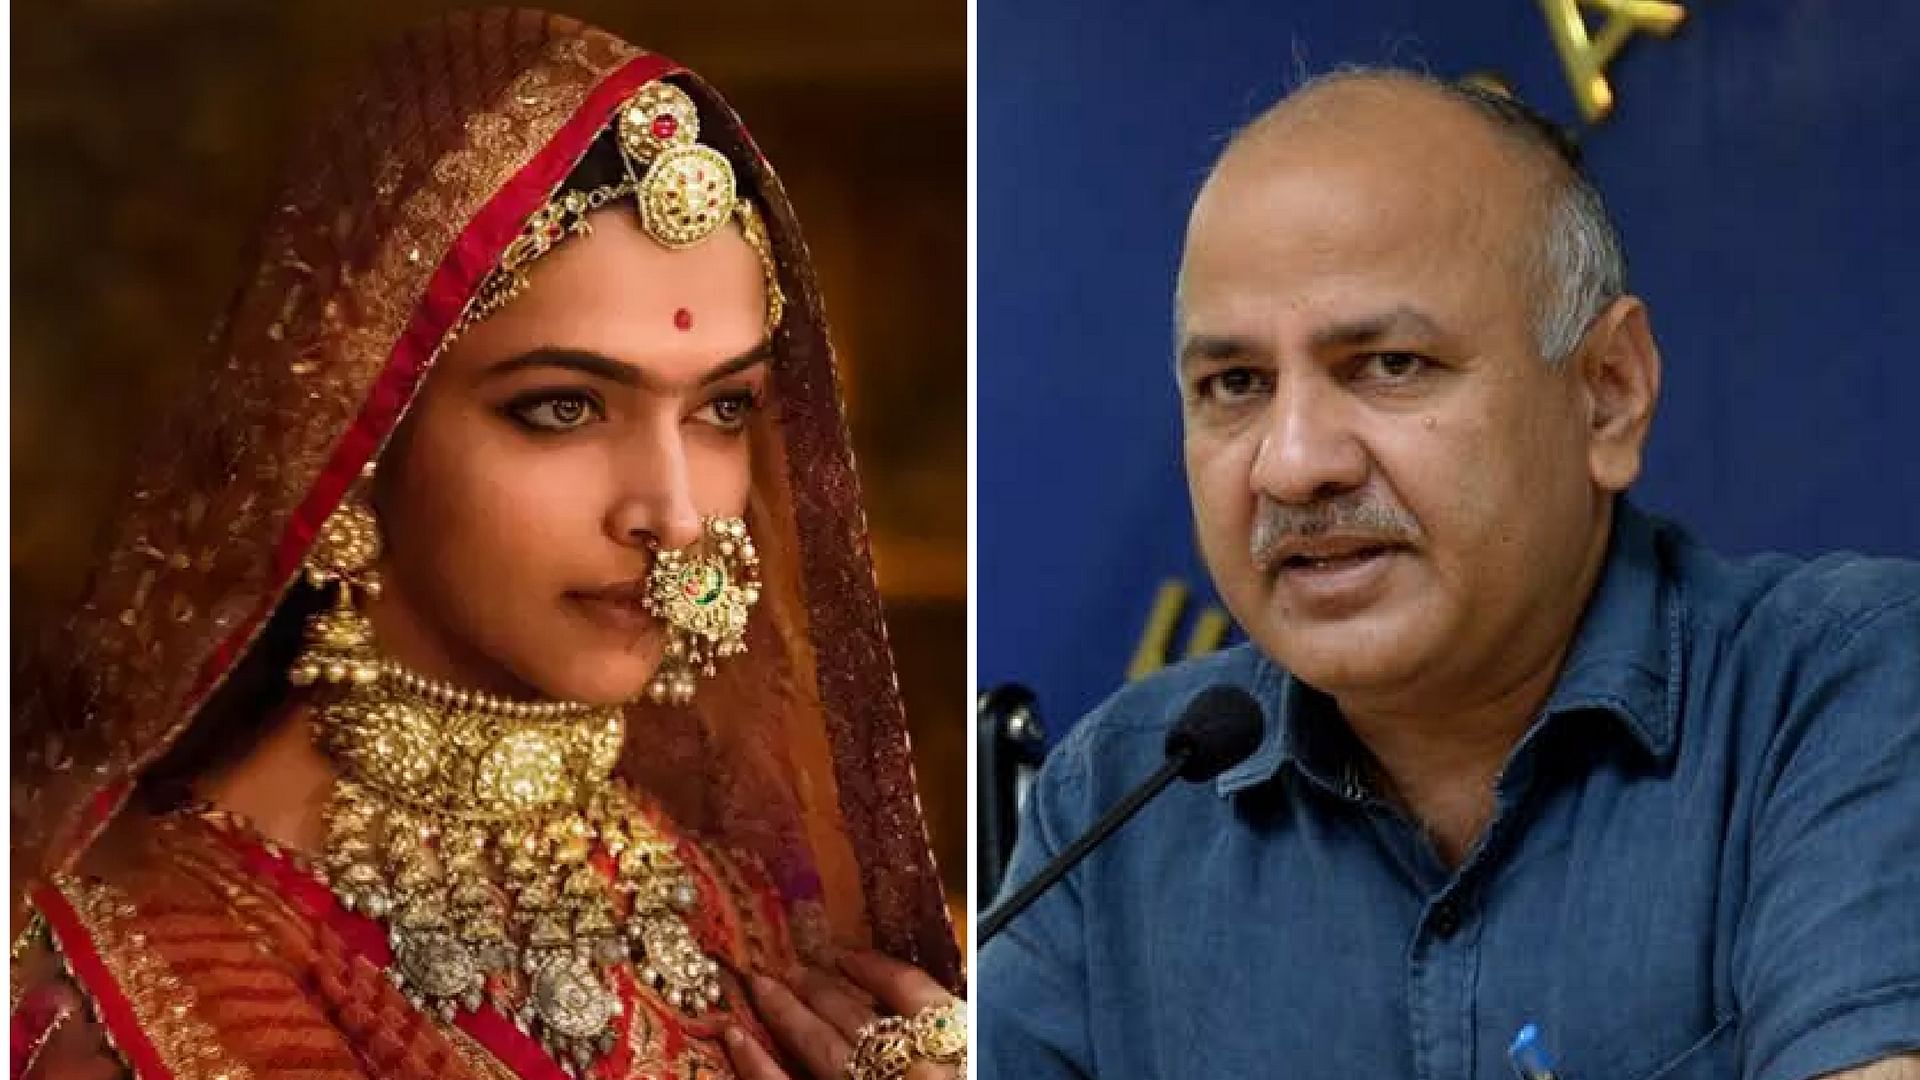 Talking to reporters in Delhi, Sisodia had said he is also a Rajput, and slammed “some people who are defaming” the community with their violent actions.